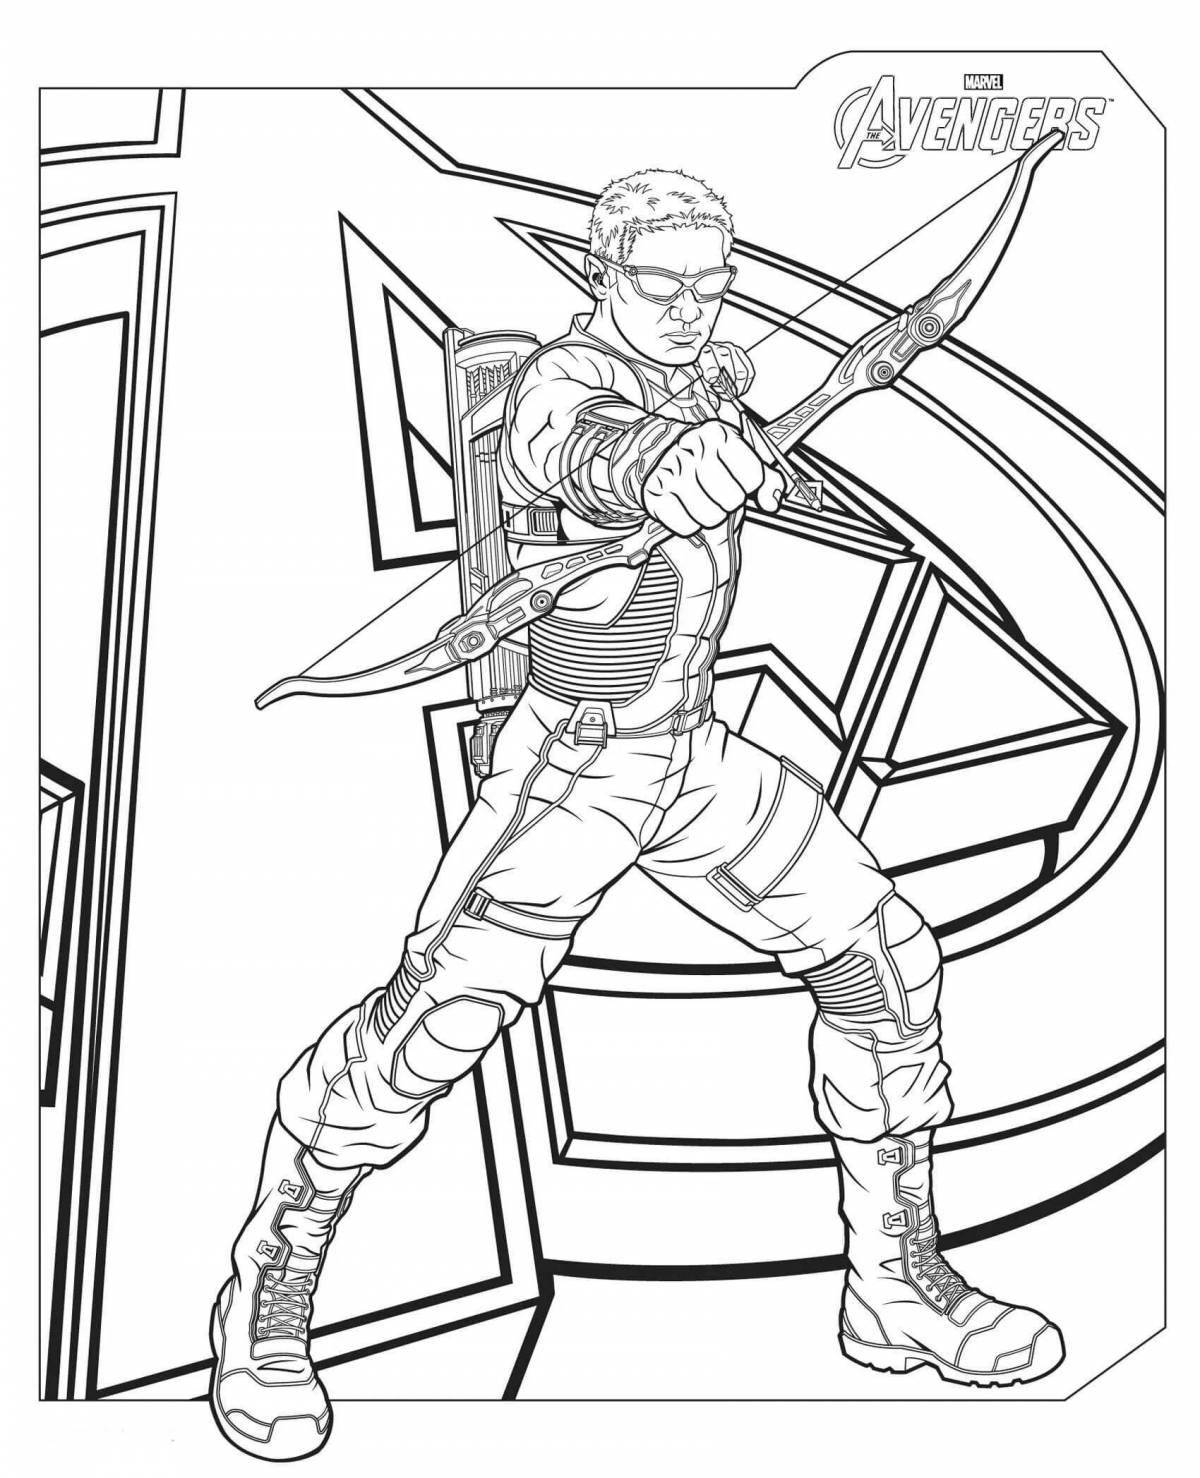 Marvel avengers animated coloring page